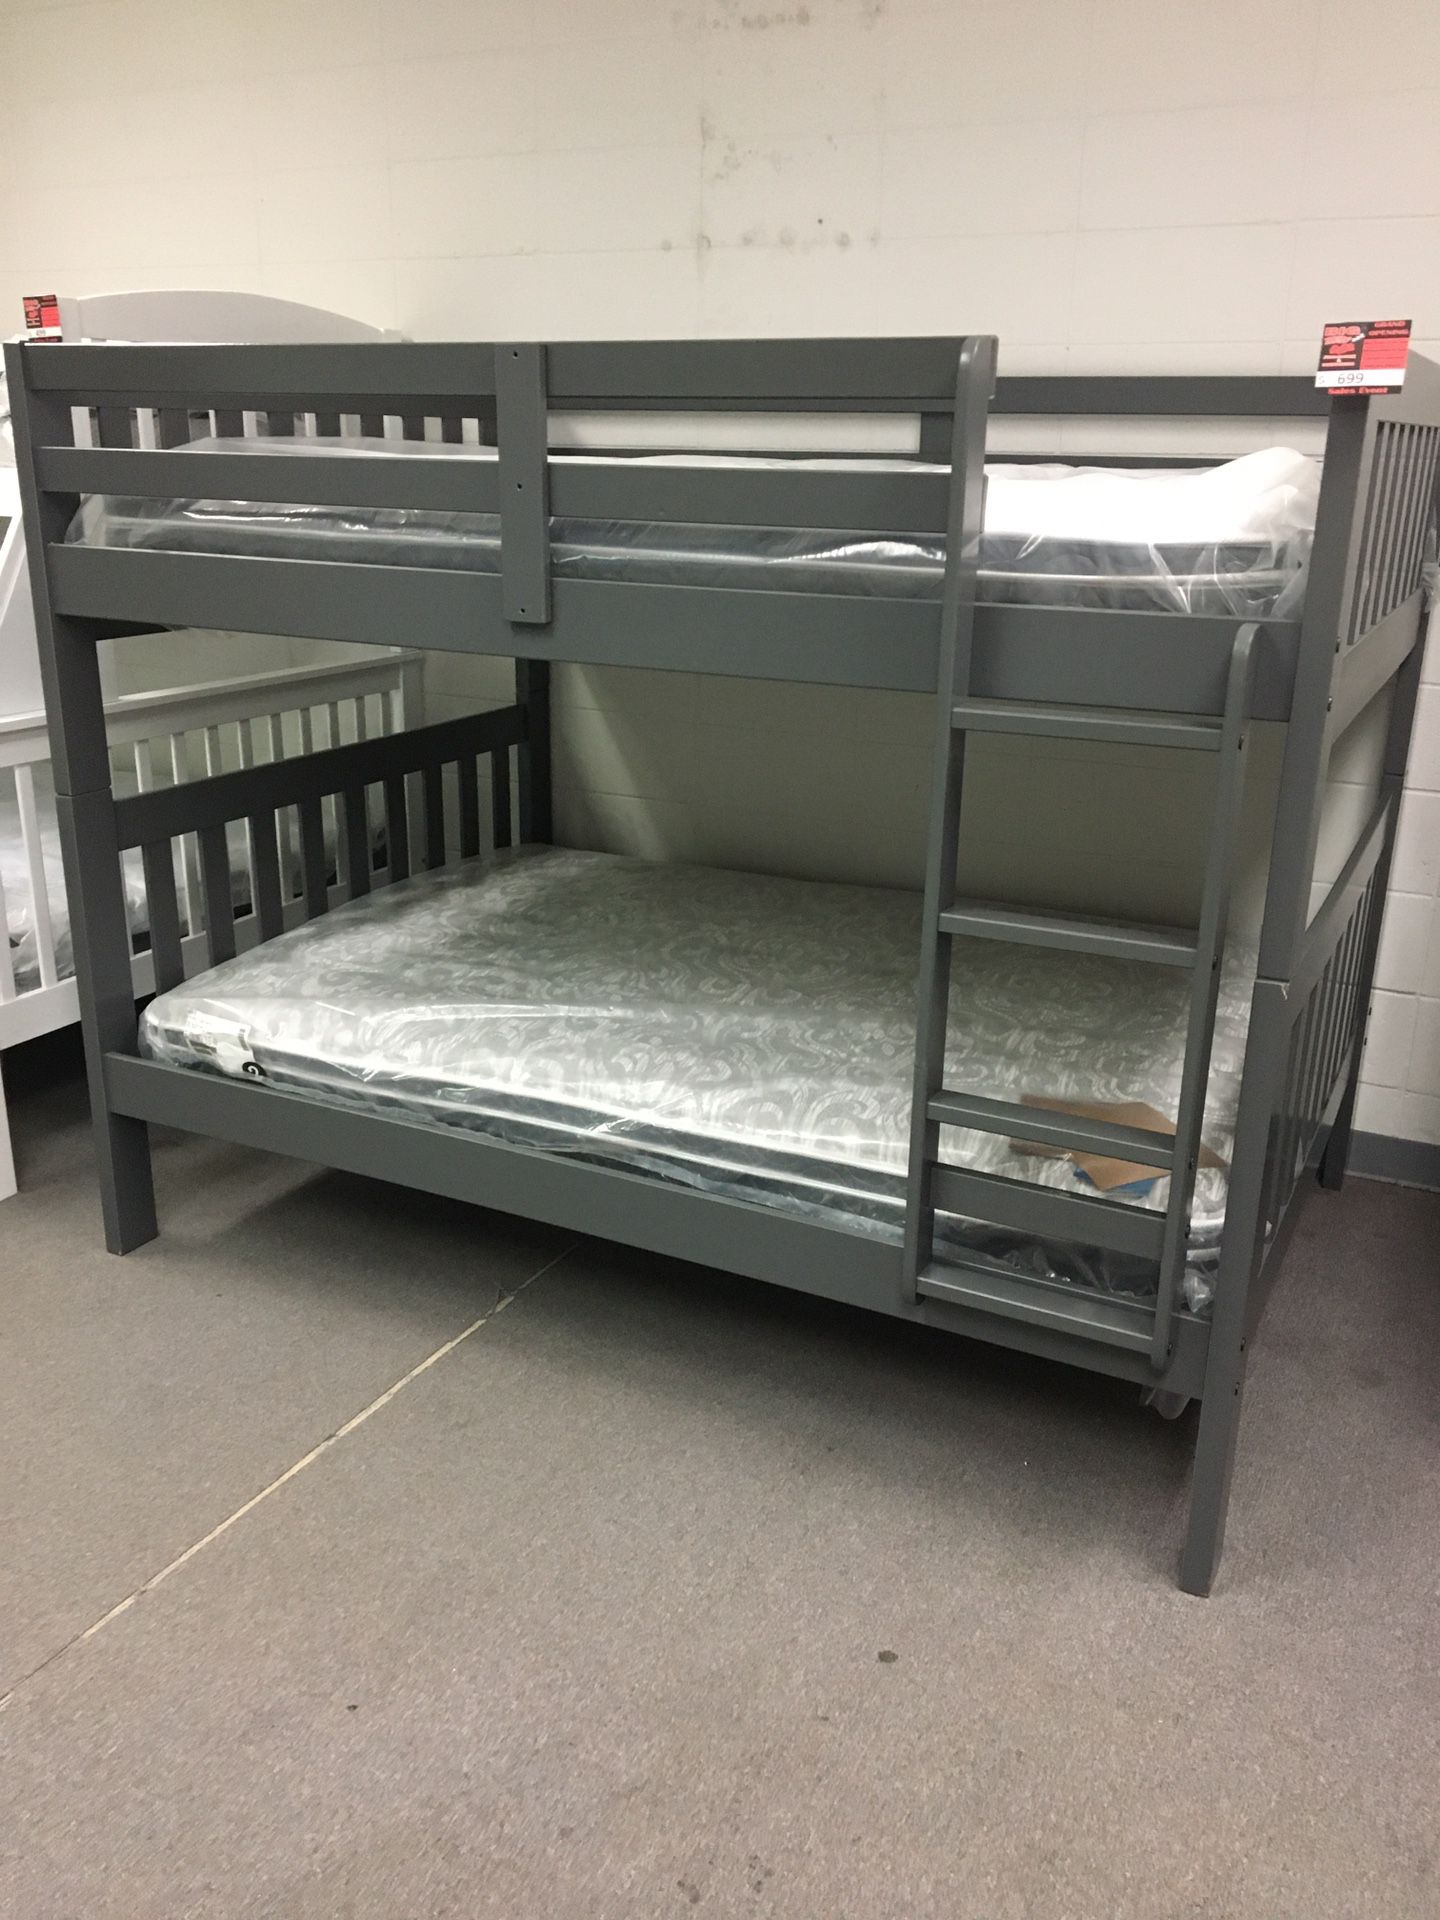 Brand New Bunk Bed !!! Come Get It Before It’s Gone!!!